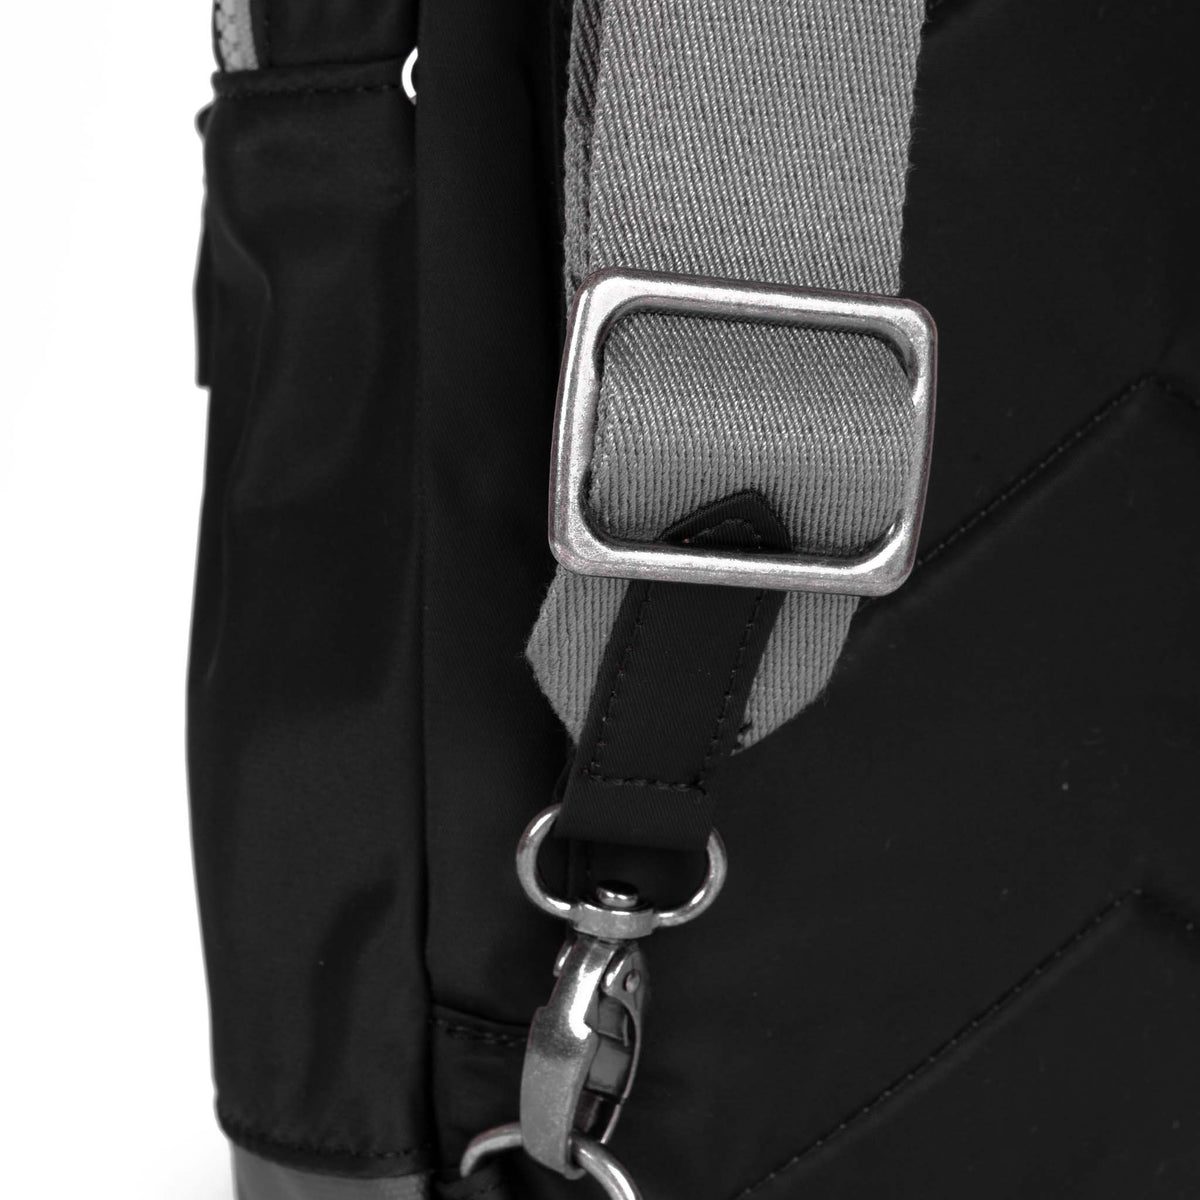 Close-up of a black strap with a metal buckle and clip on an Ori London Willlesden B Large Sling Black crossbody bag, emphasizing the texture and hardware details.